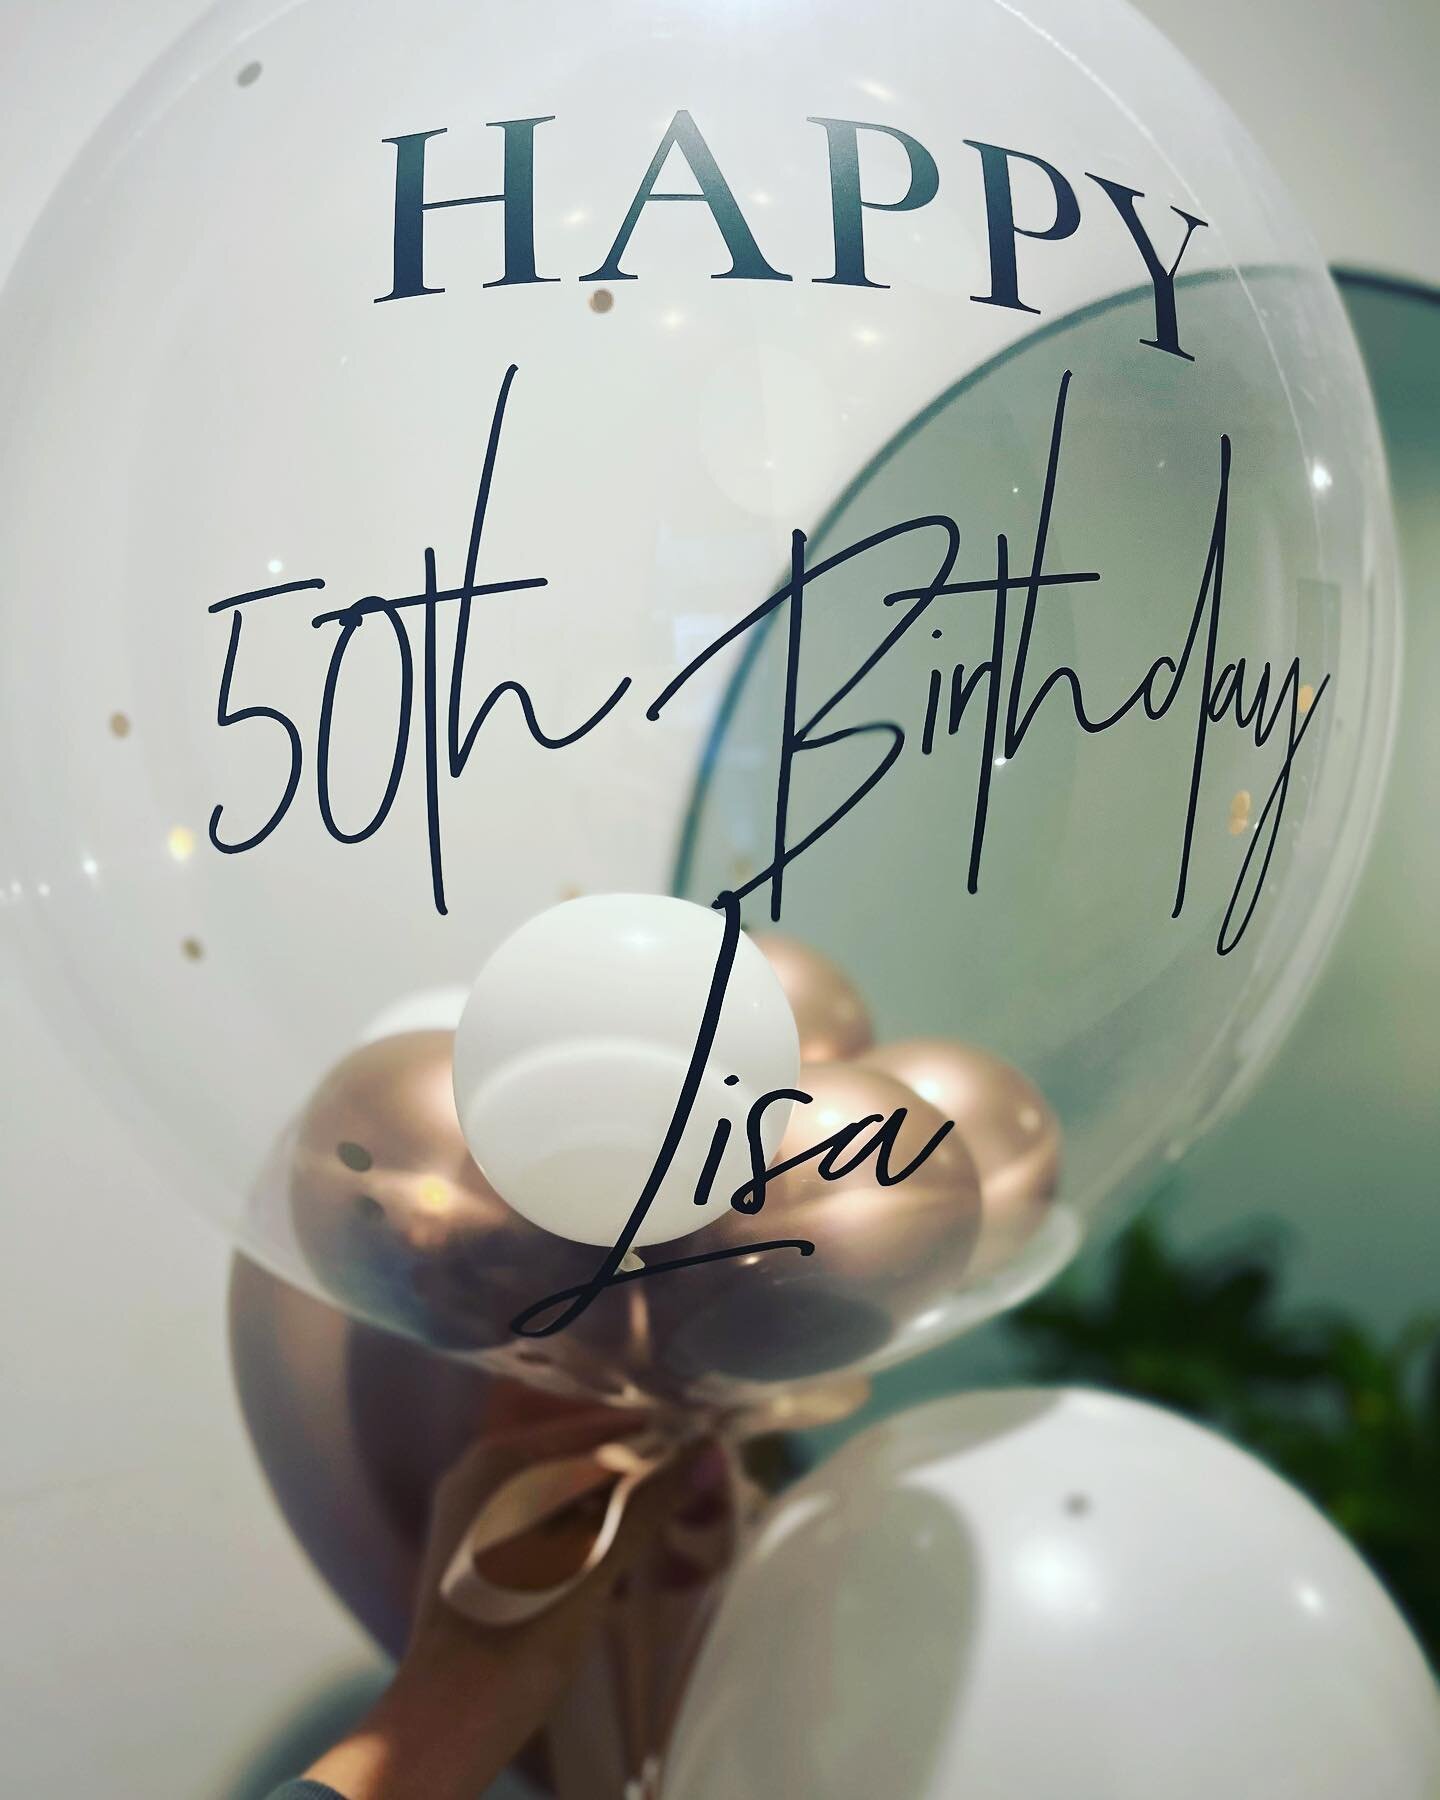 Milestone Bubble Balloons 💫

Personalised for you!
Any colour mini balloons
Choice of vinyl colour